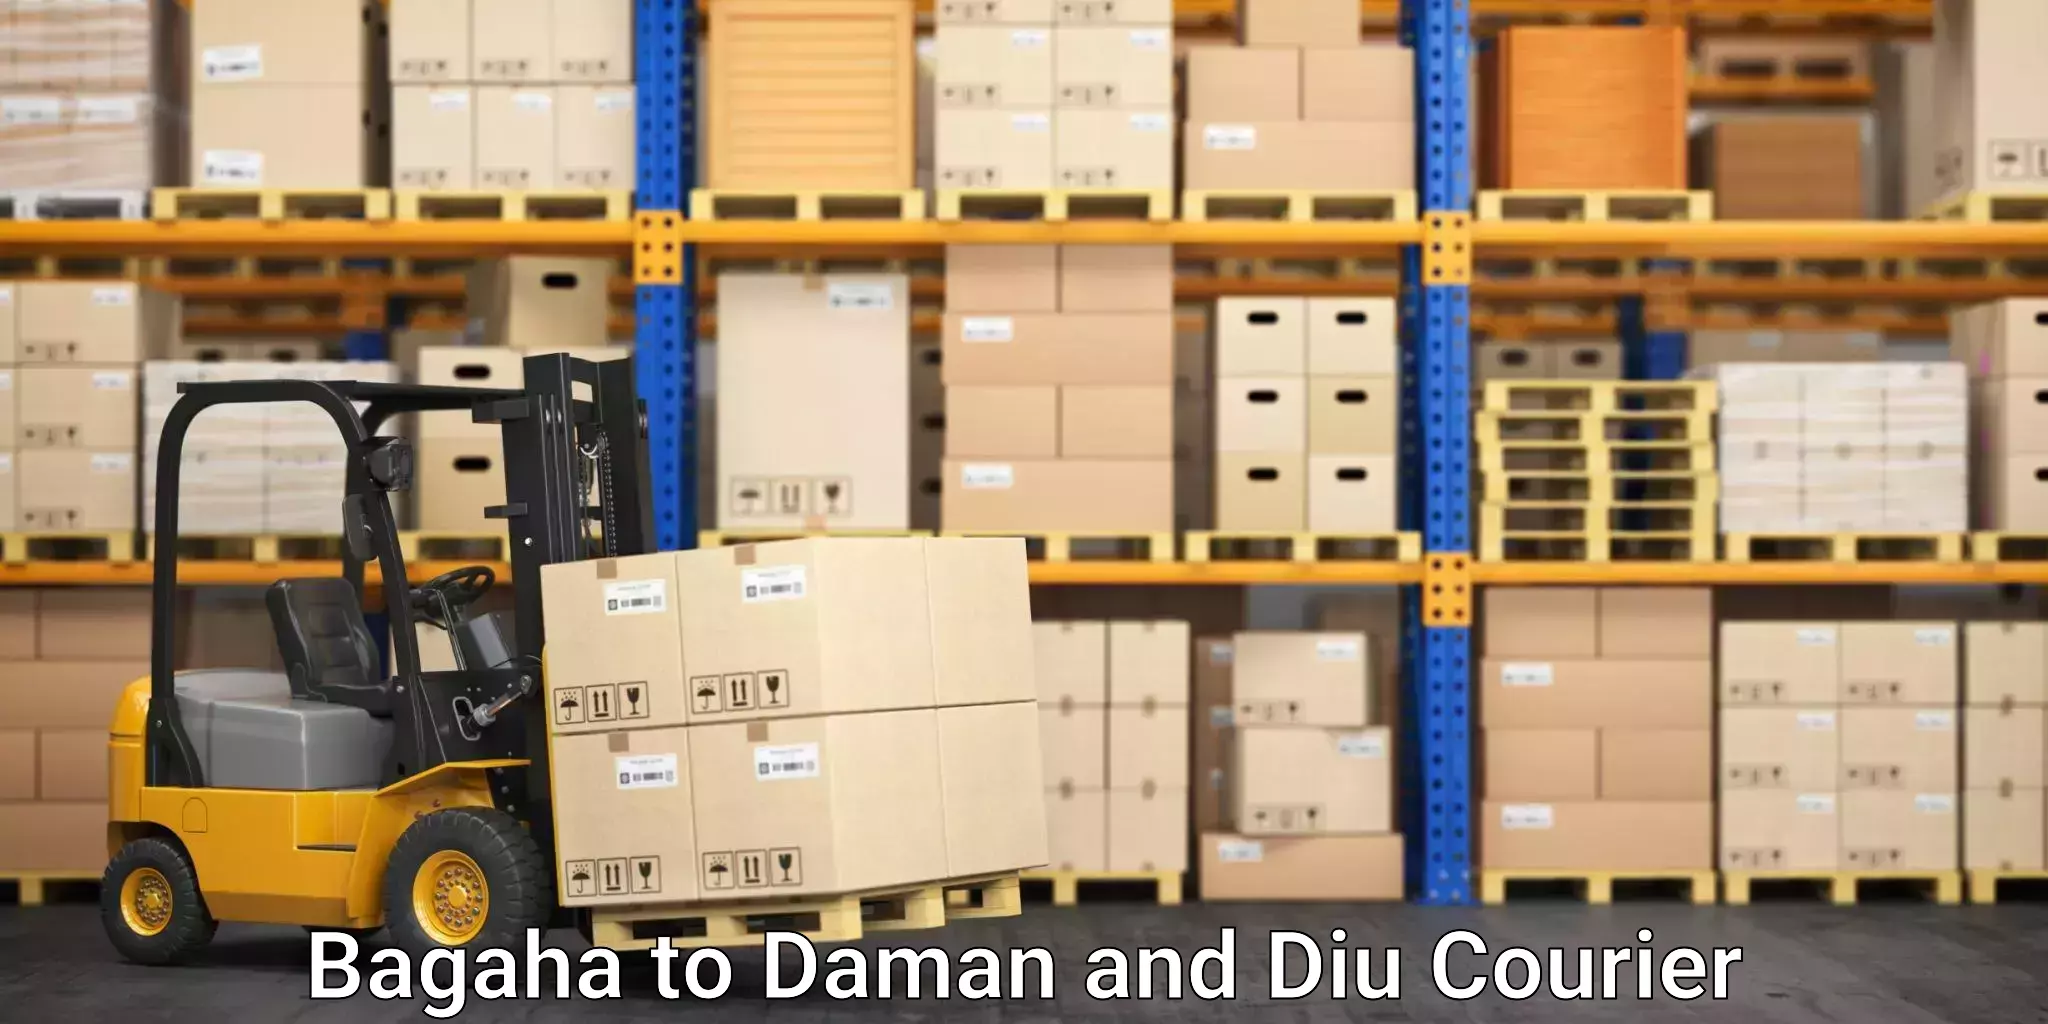 Reliable moving assistance Bagaha to Daman and Diu